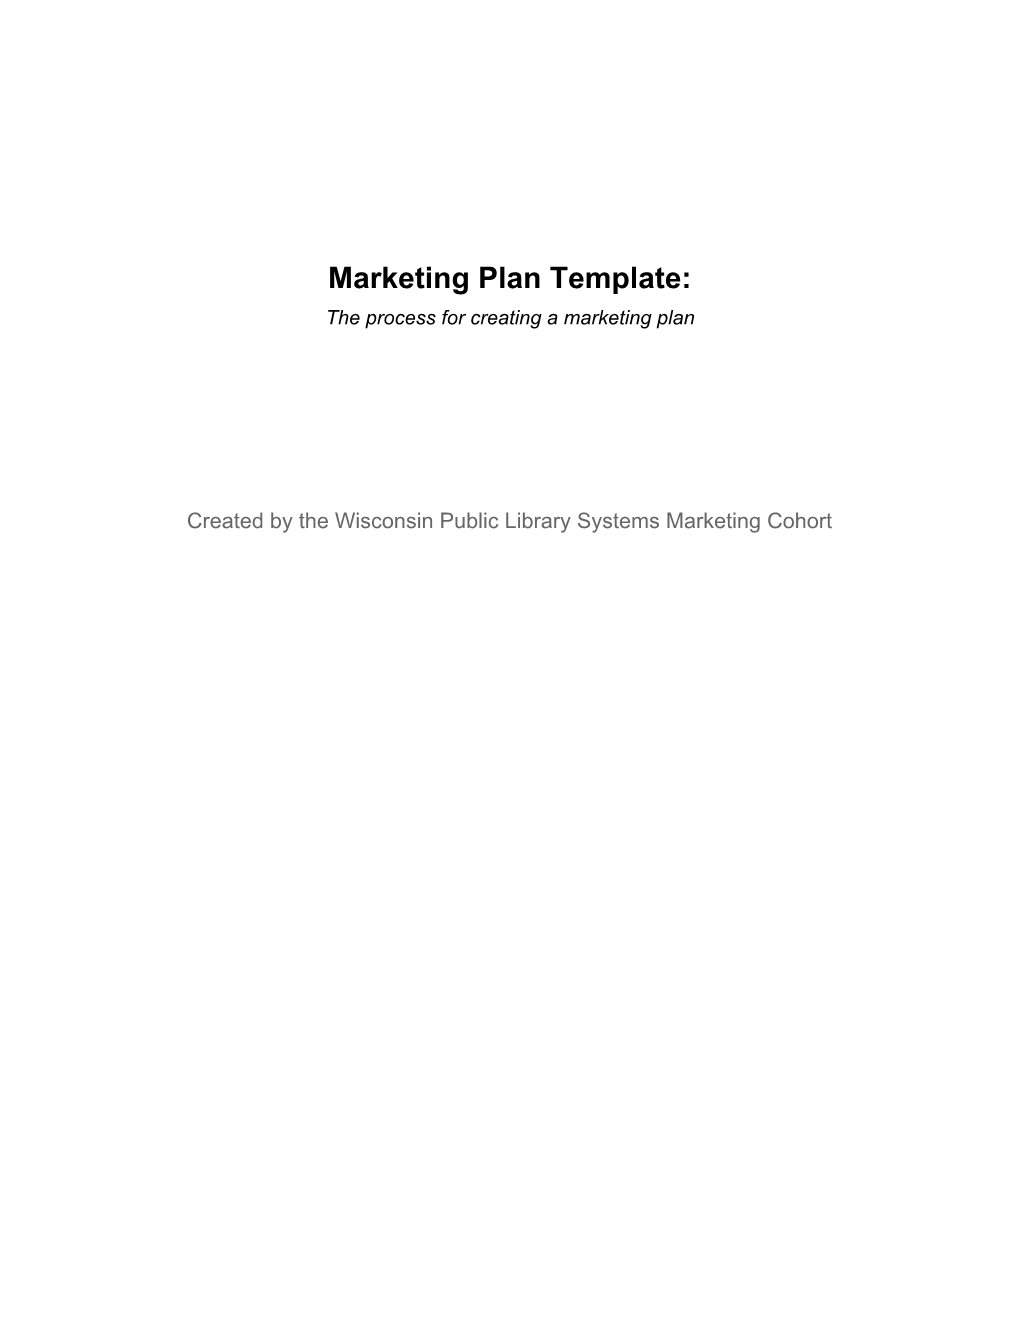 Marketing Plan Template: the Process for Creating a Marketing Plan